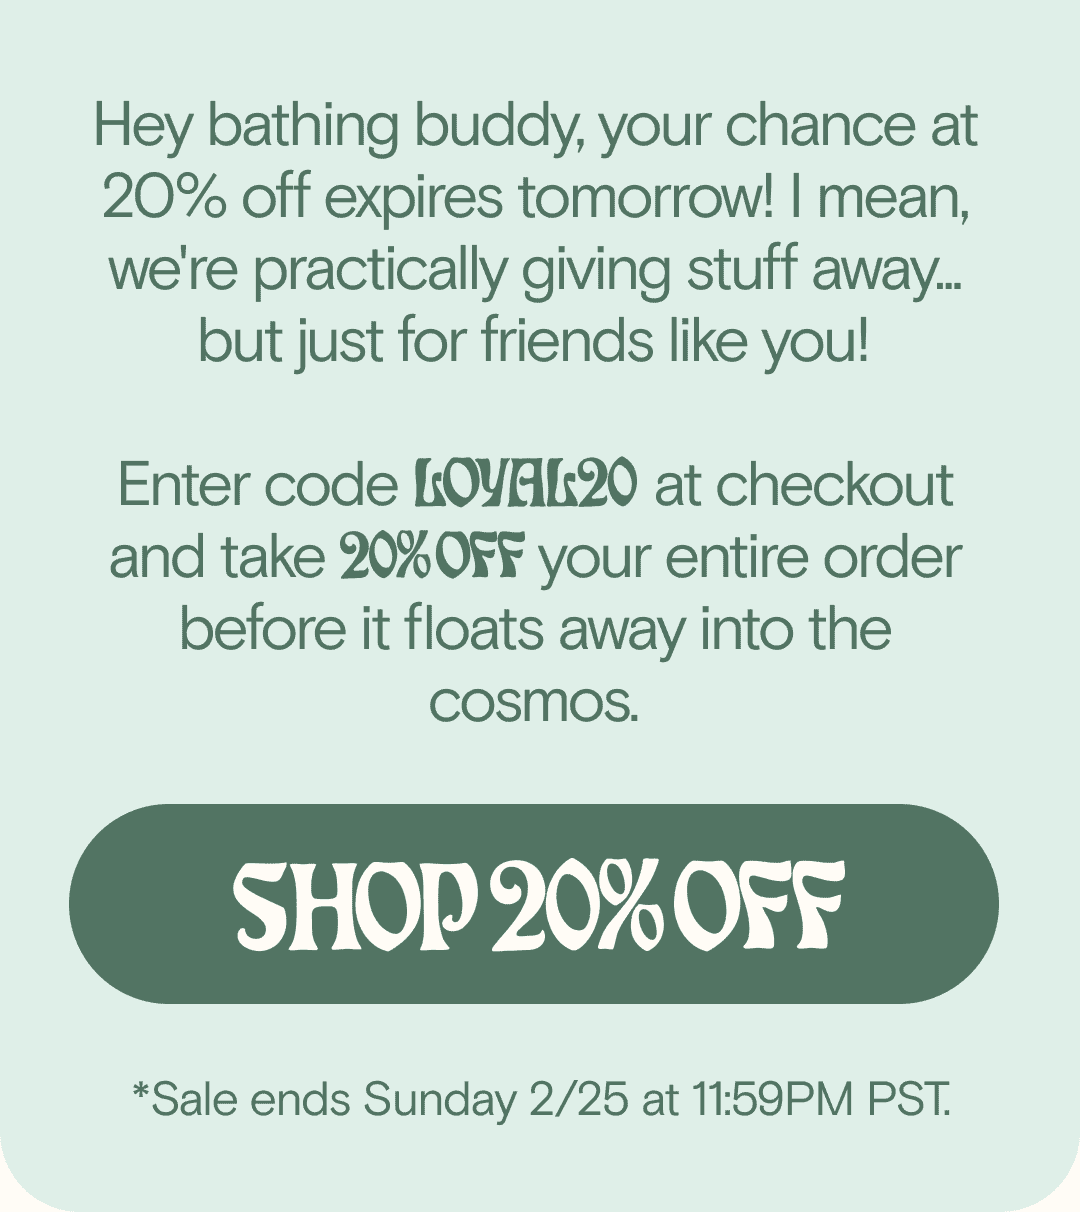 To our loyal bathers, dedicated dippers, and aqua addicts... Enter code LOYAL20 at checkout for 20% OFF your entire order. Because your support and love doesn’t go unnotHey bathing buddy, your chance at 20% off expires tomorrow! I mean, we're practically giving stuff away... but just for friends like you! Enter code LOYAL20 at checkout and take 20% OFF your entire order before it floats away into the cosmos. SHOP 20% OFF *Sale ends Sunday 2/25 at 11:59PM PST.